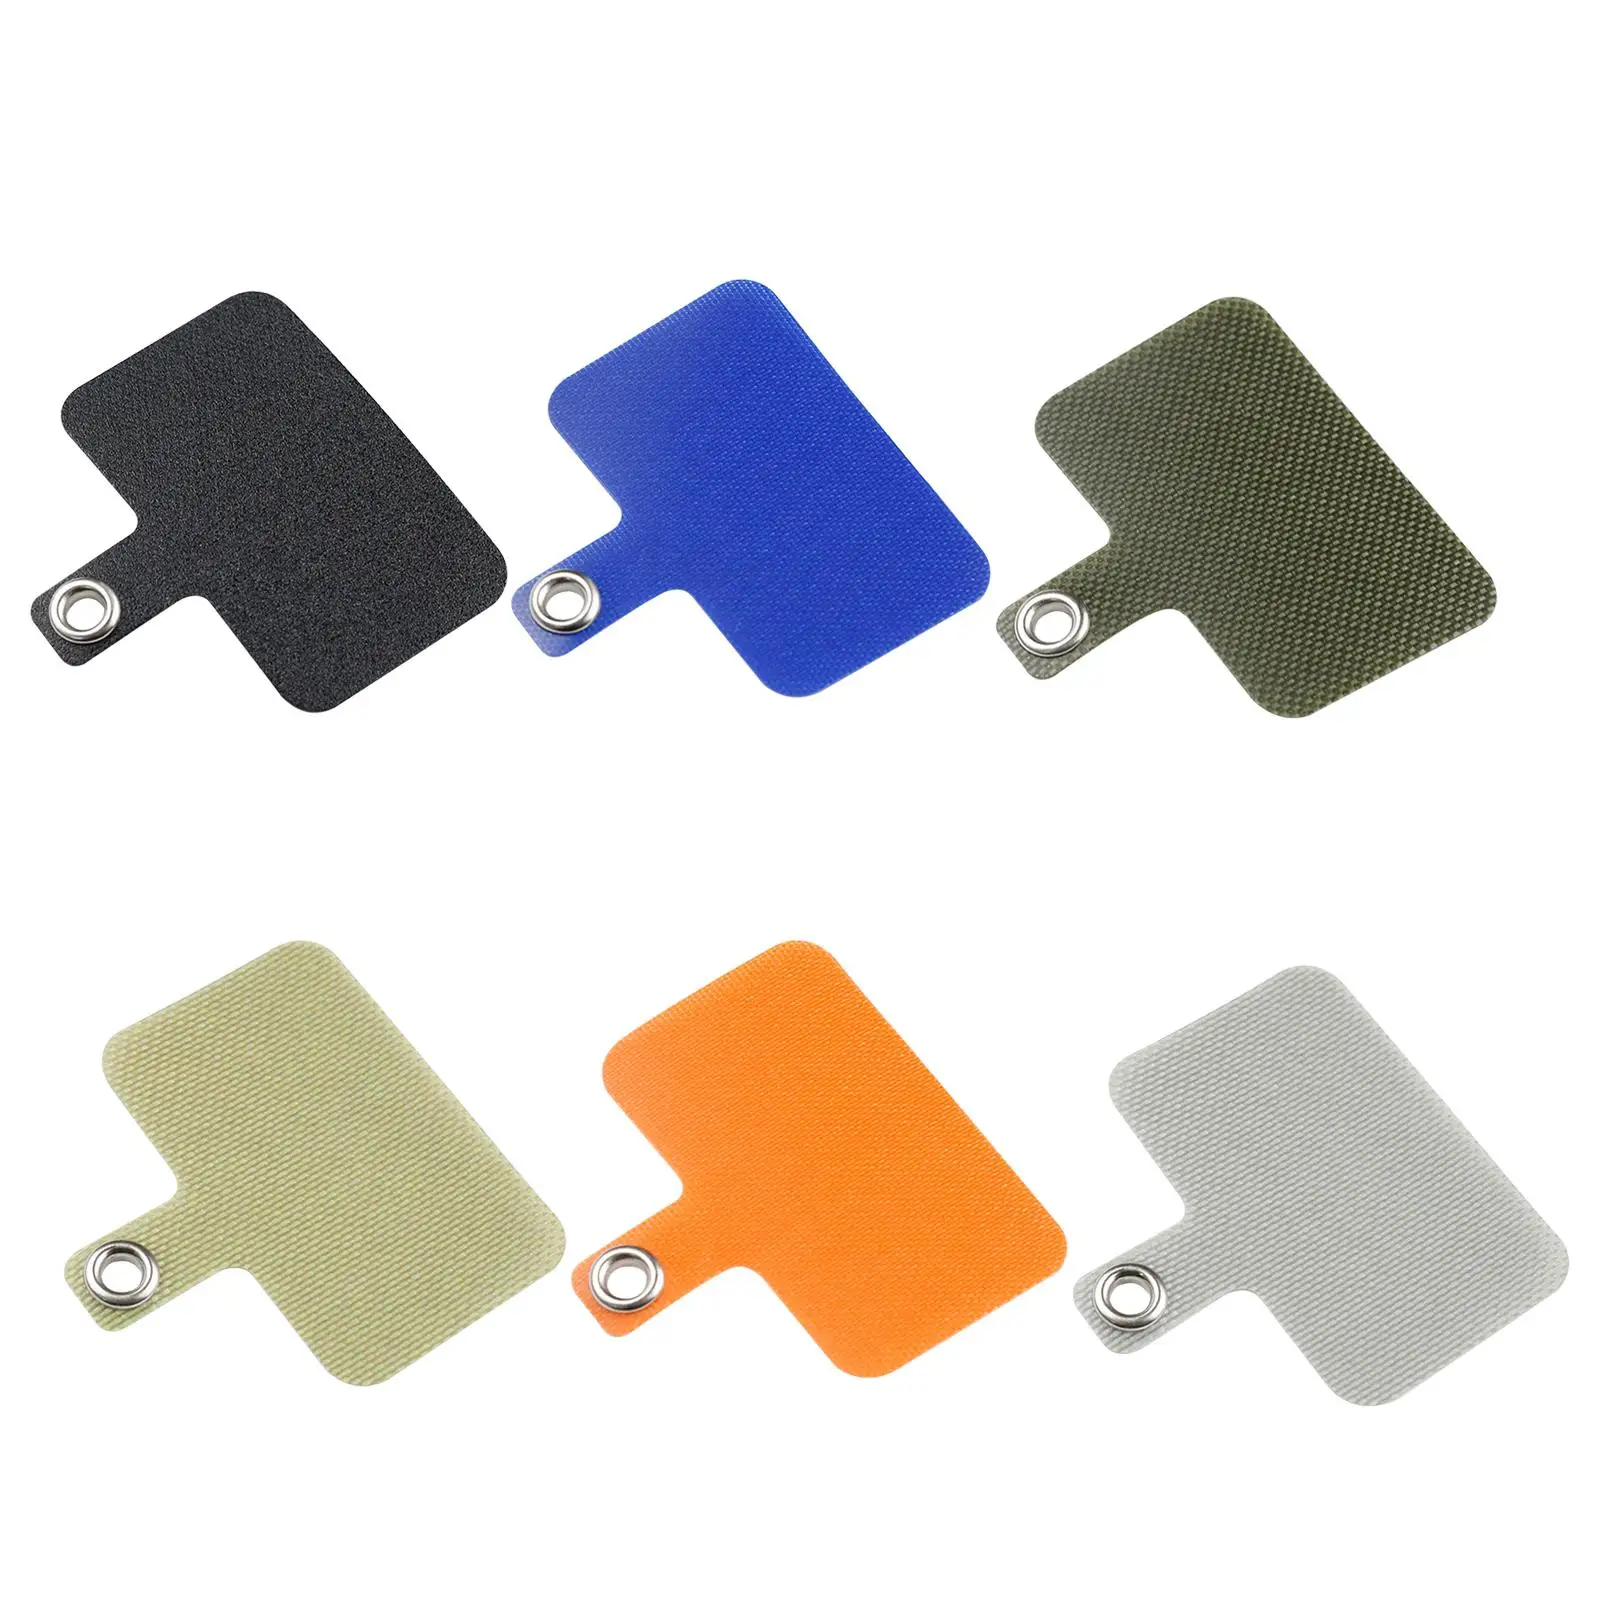 Phone Lanyard Gasket, Safety Tether Patch Drop Protection Anti Lost Neck Cord Patch